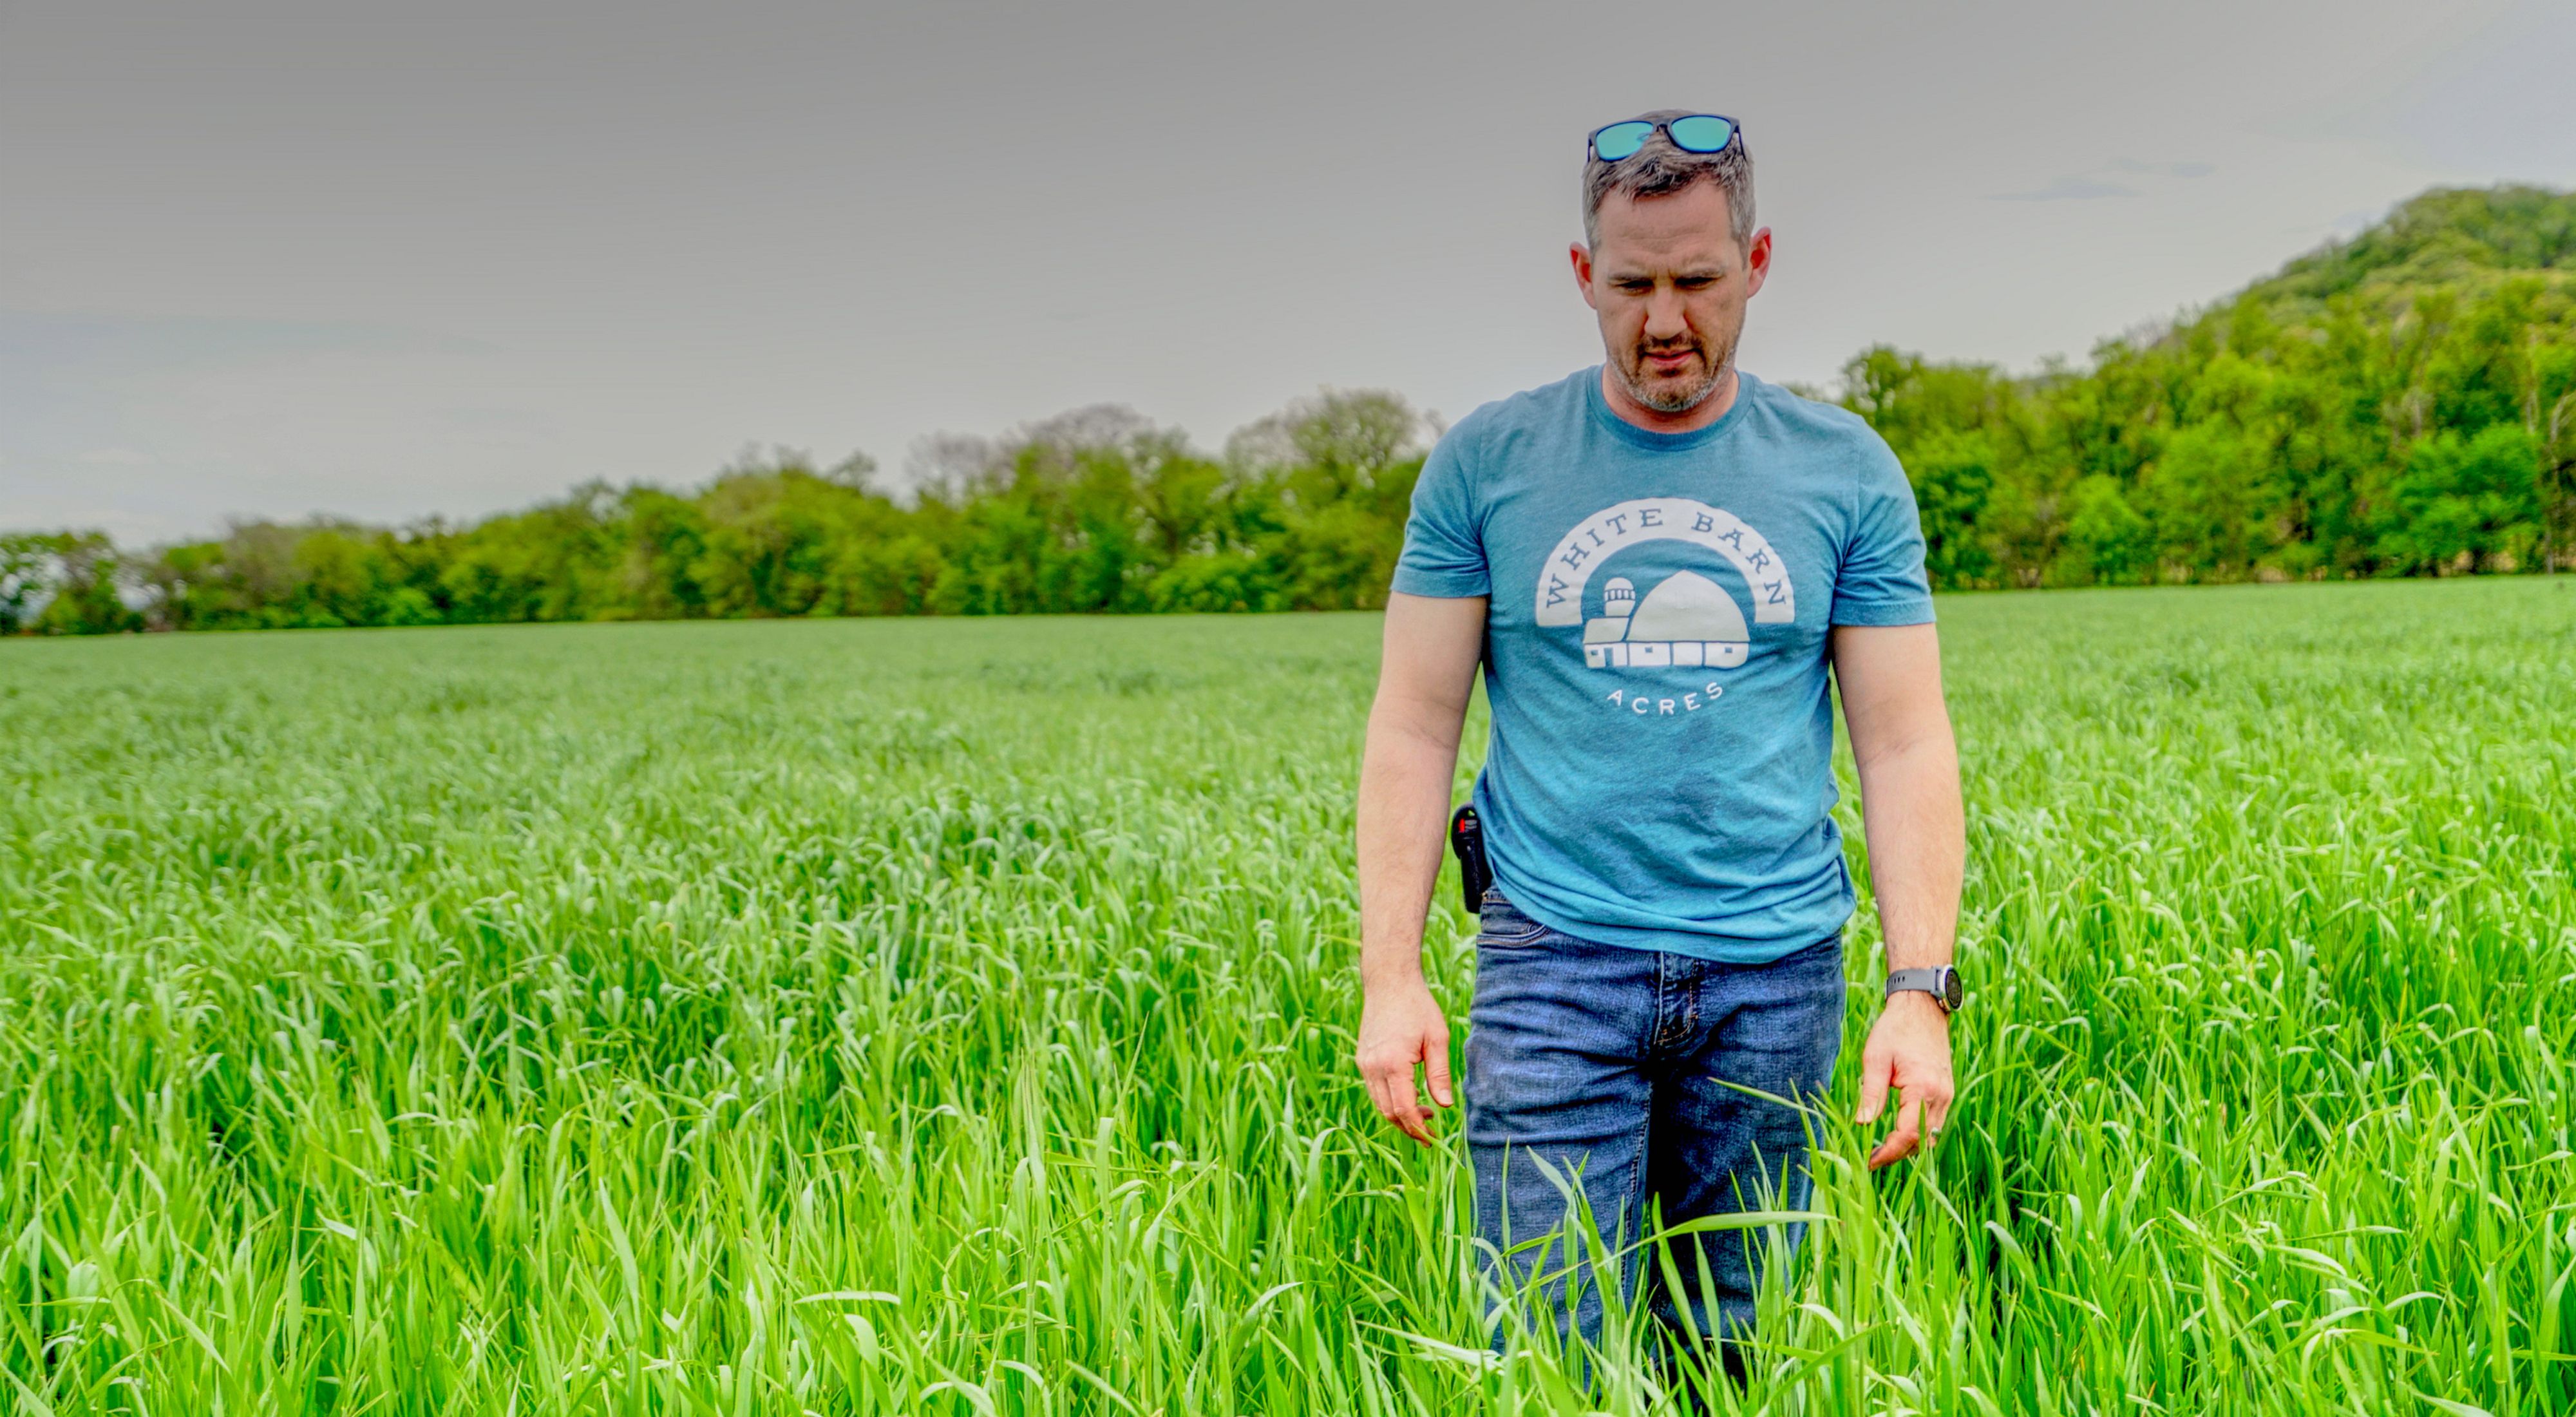 Matt Tentis standing in a field of cover crops wearing a t-shirt that reads White Barn Acres.